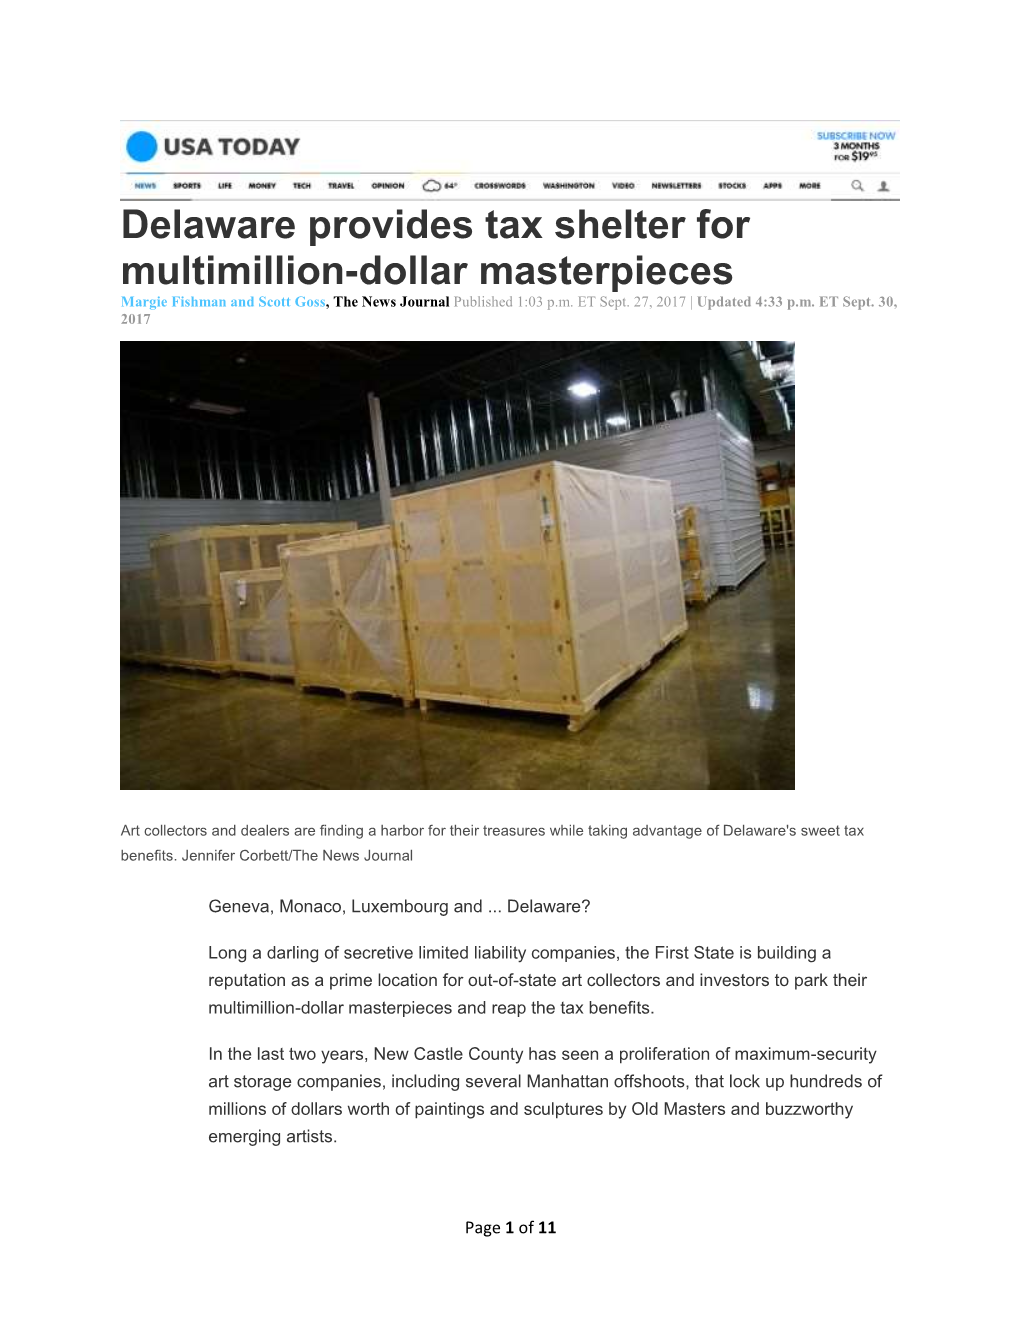 Delaware Provides Tax Shelter for Multimillion-Dollar Masterpieces Margie Fishman and Scott Goss, the News Journal Published 1:03 P.M